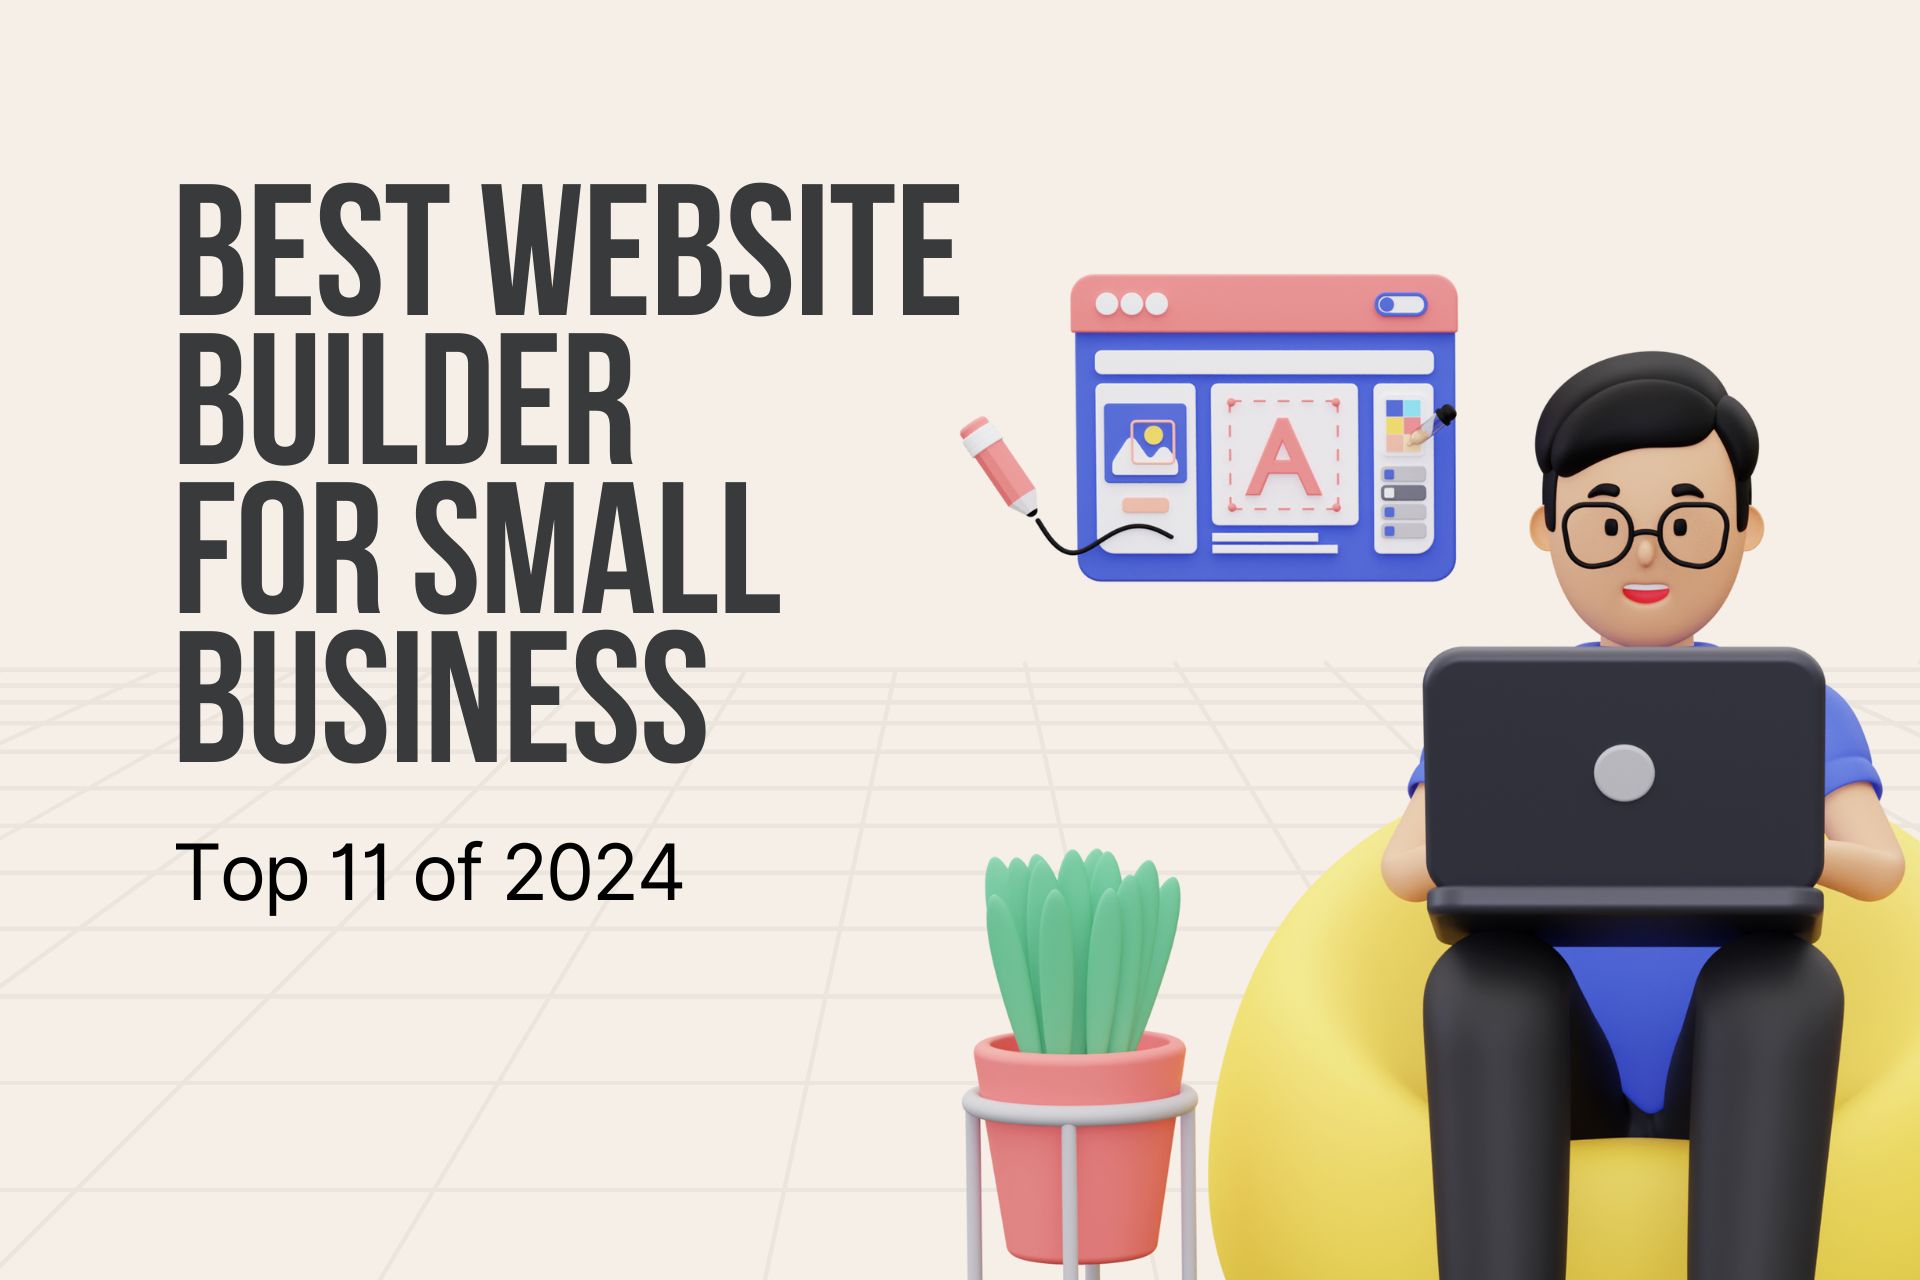 Best Website Builder for Small Business: Top 11 of 2024